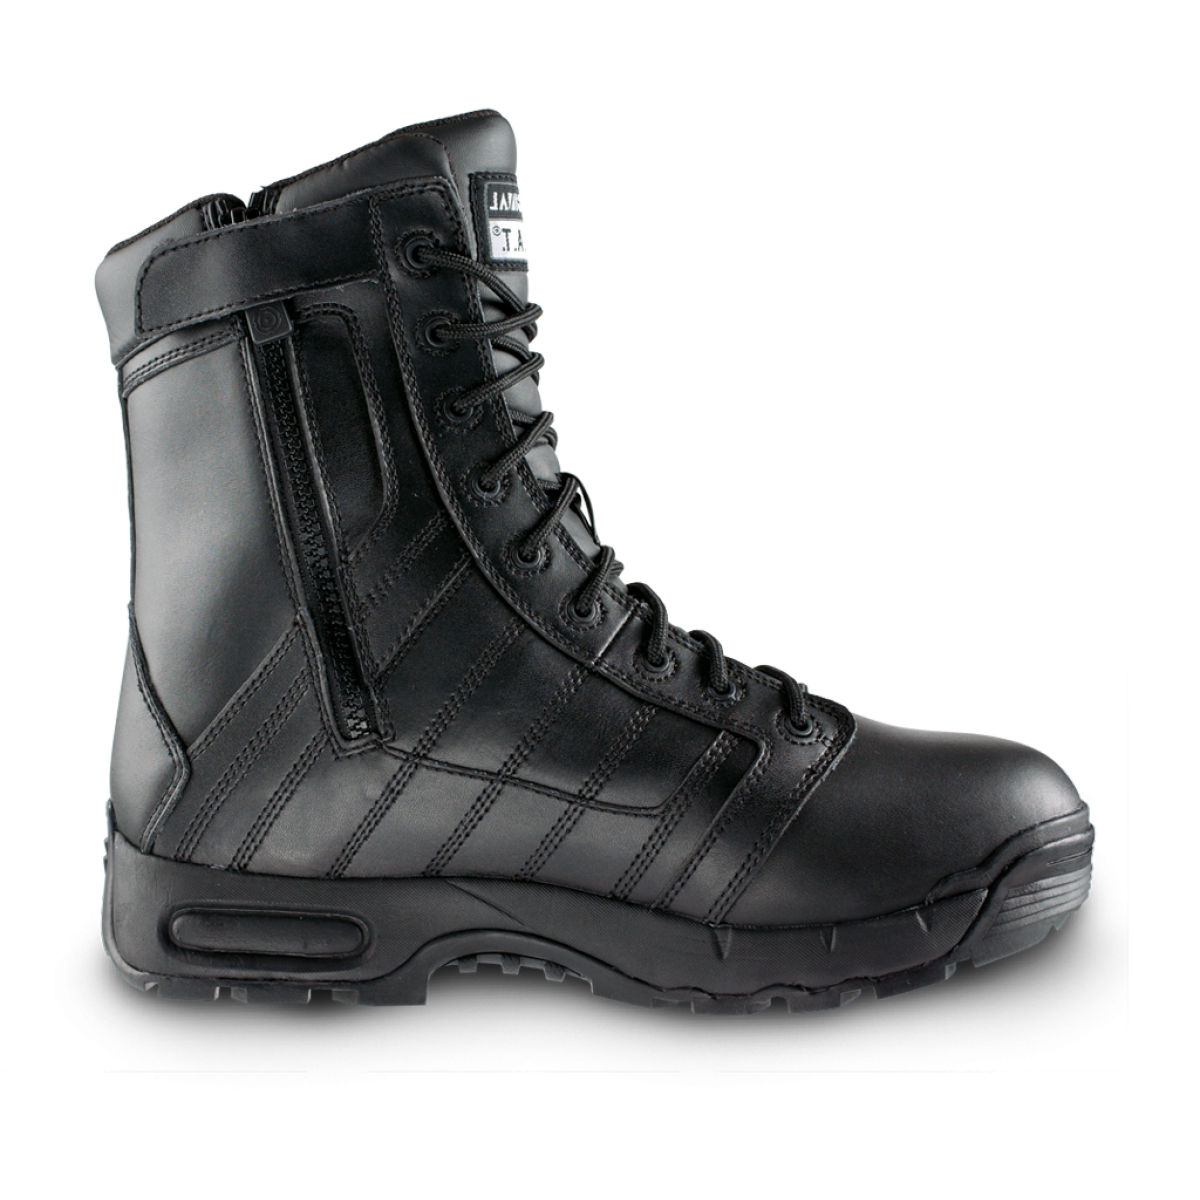 Black Boots Png Image - Boots, Transparent background PNG HD thumbnail